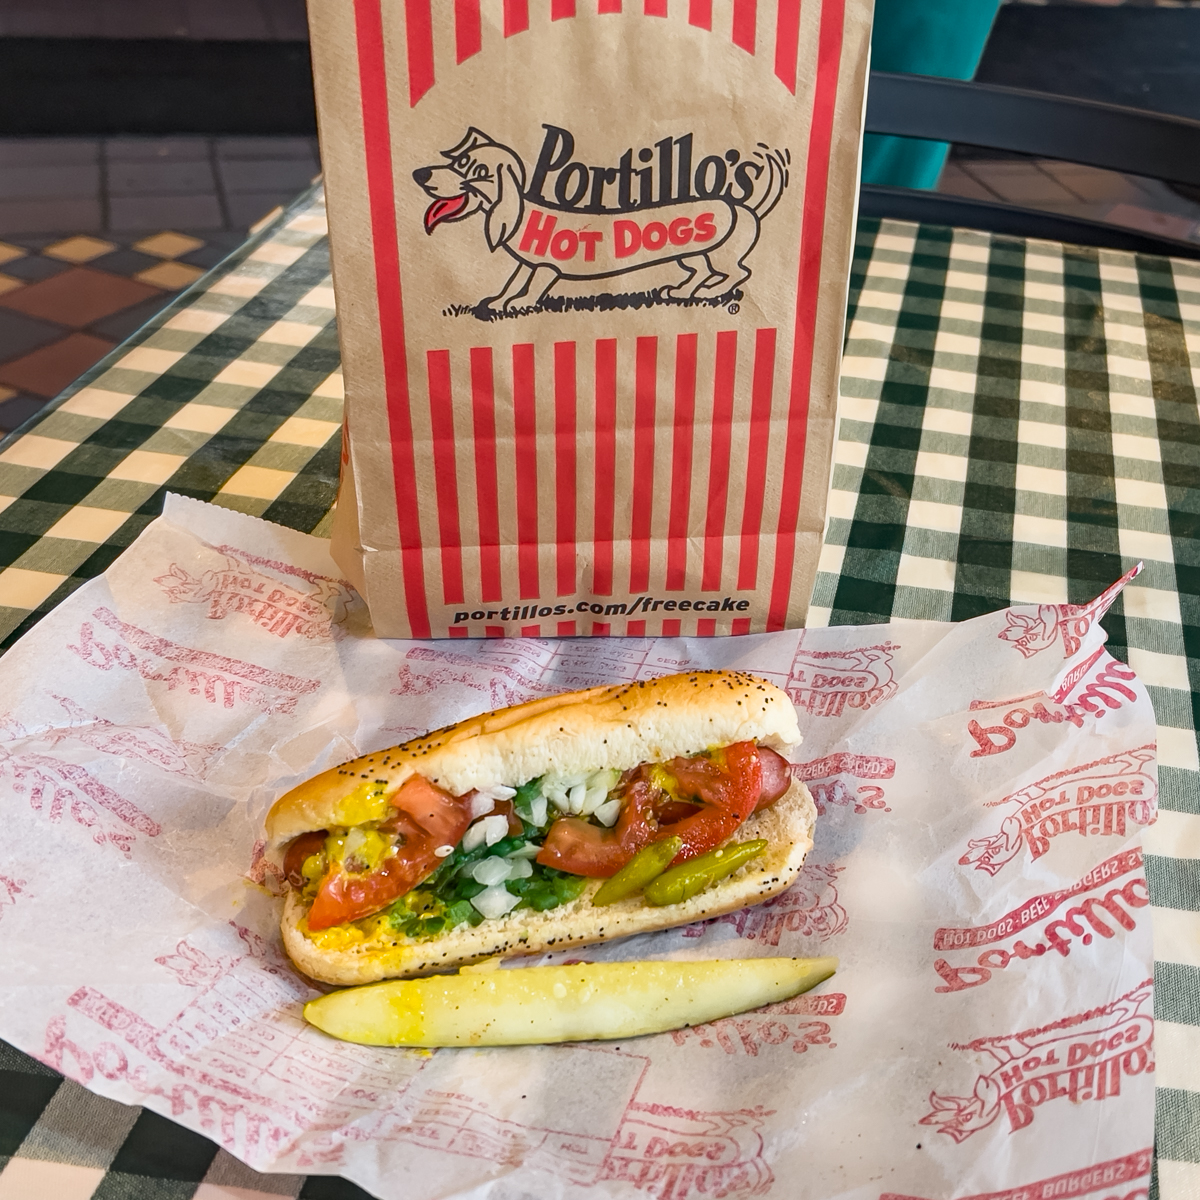 This is the way you eat a hot dog in Chicago - no ketchup!

Have you been to Chicago and eaten a Portillo's Hot Dog?

 #travelwritersuniversity #ifwtwa #ifwtwa1 #FoodieFriday #foodie #foodphotography #lunch #phototravelwrite @ChooseChicago #travelIllinois @portilloshotdog